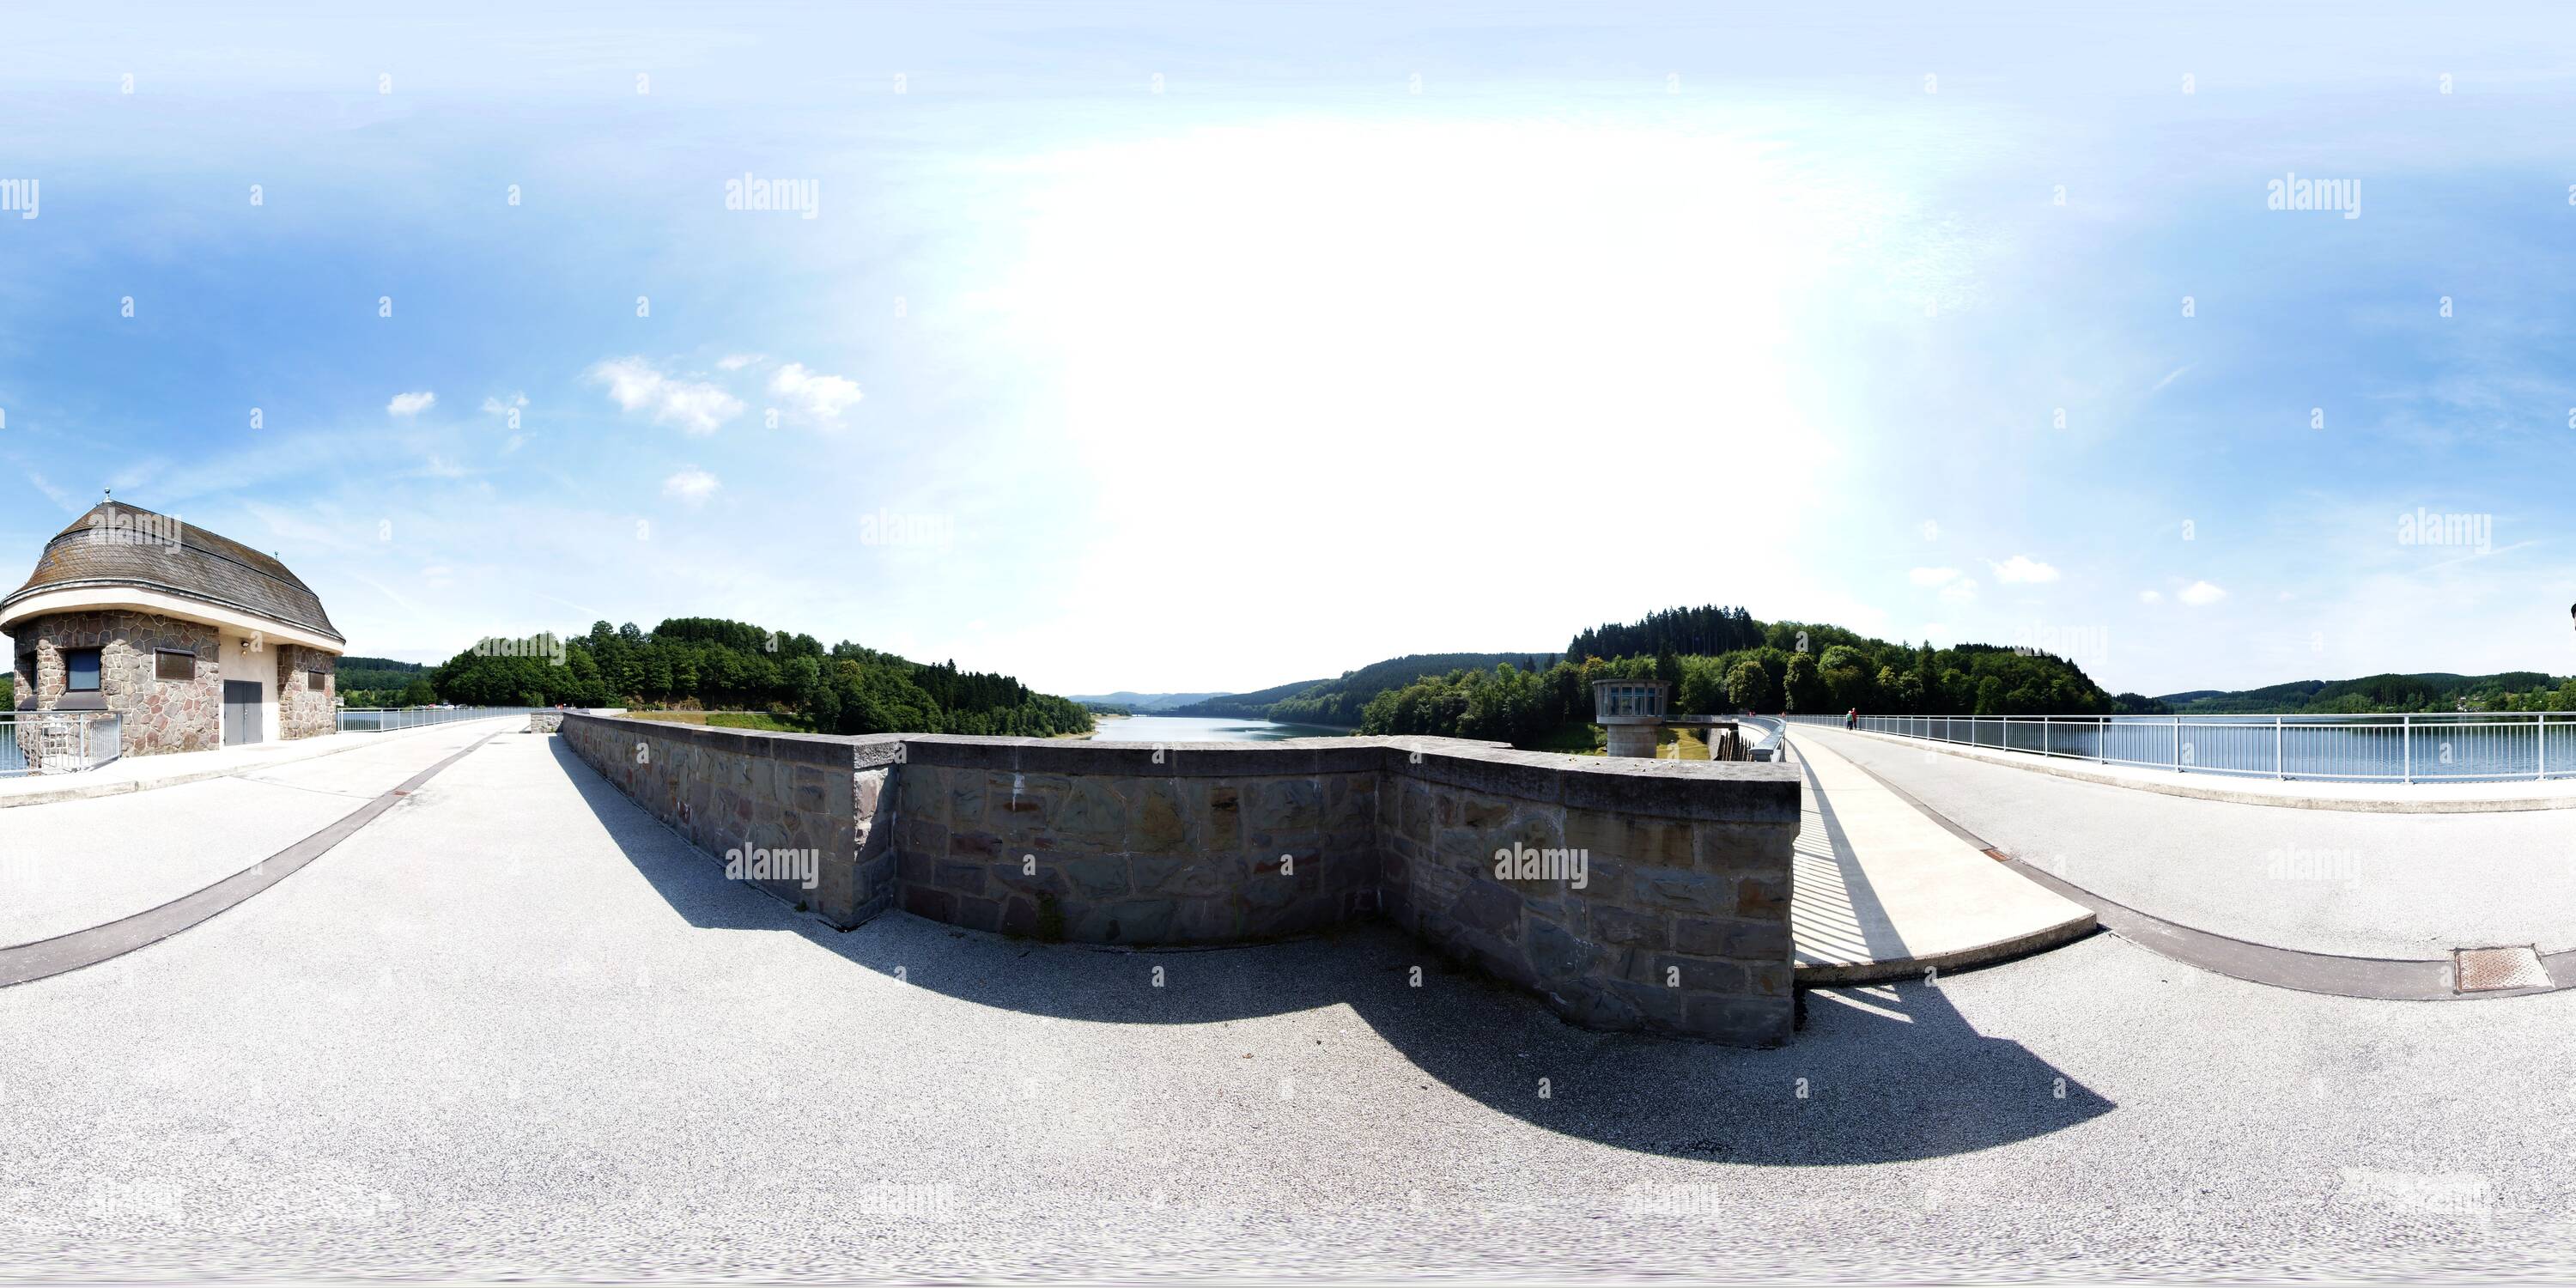 360 degree panoramic view of lister reservoir